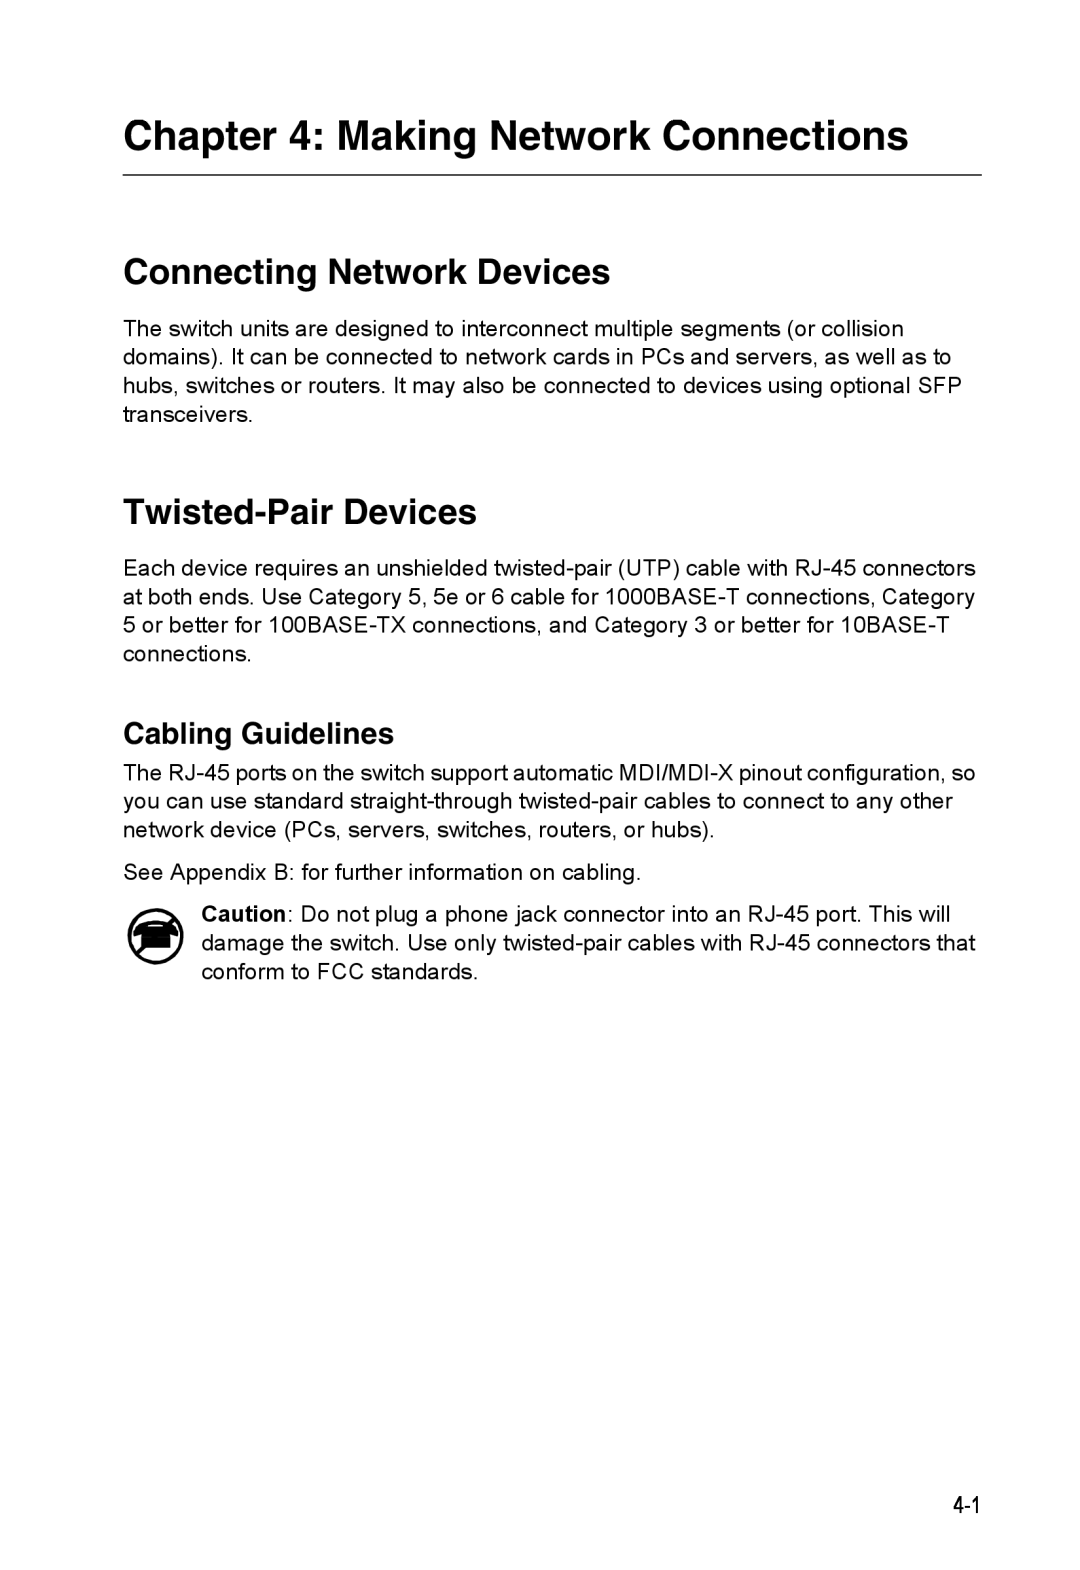 Accton Technology ES4324 Making Network Connections, Connecting Network Devices, Twisted-Pair Devices, Cabling Guidelines 